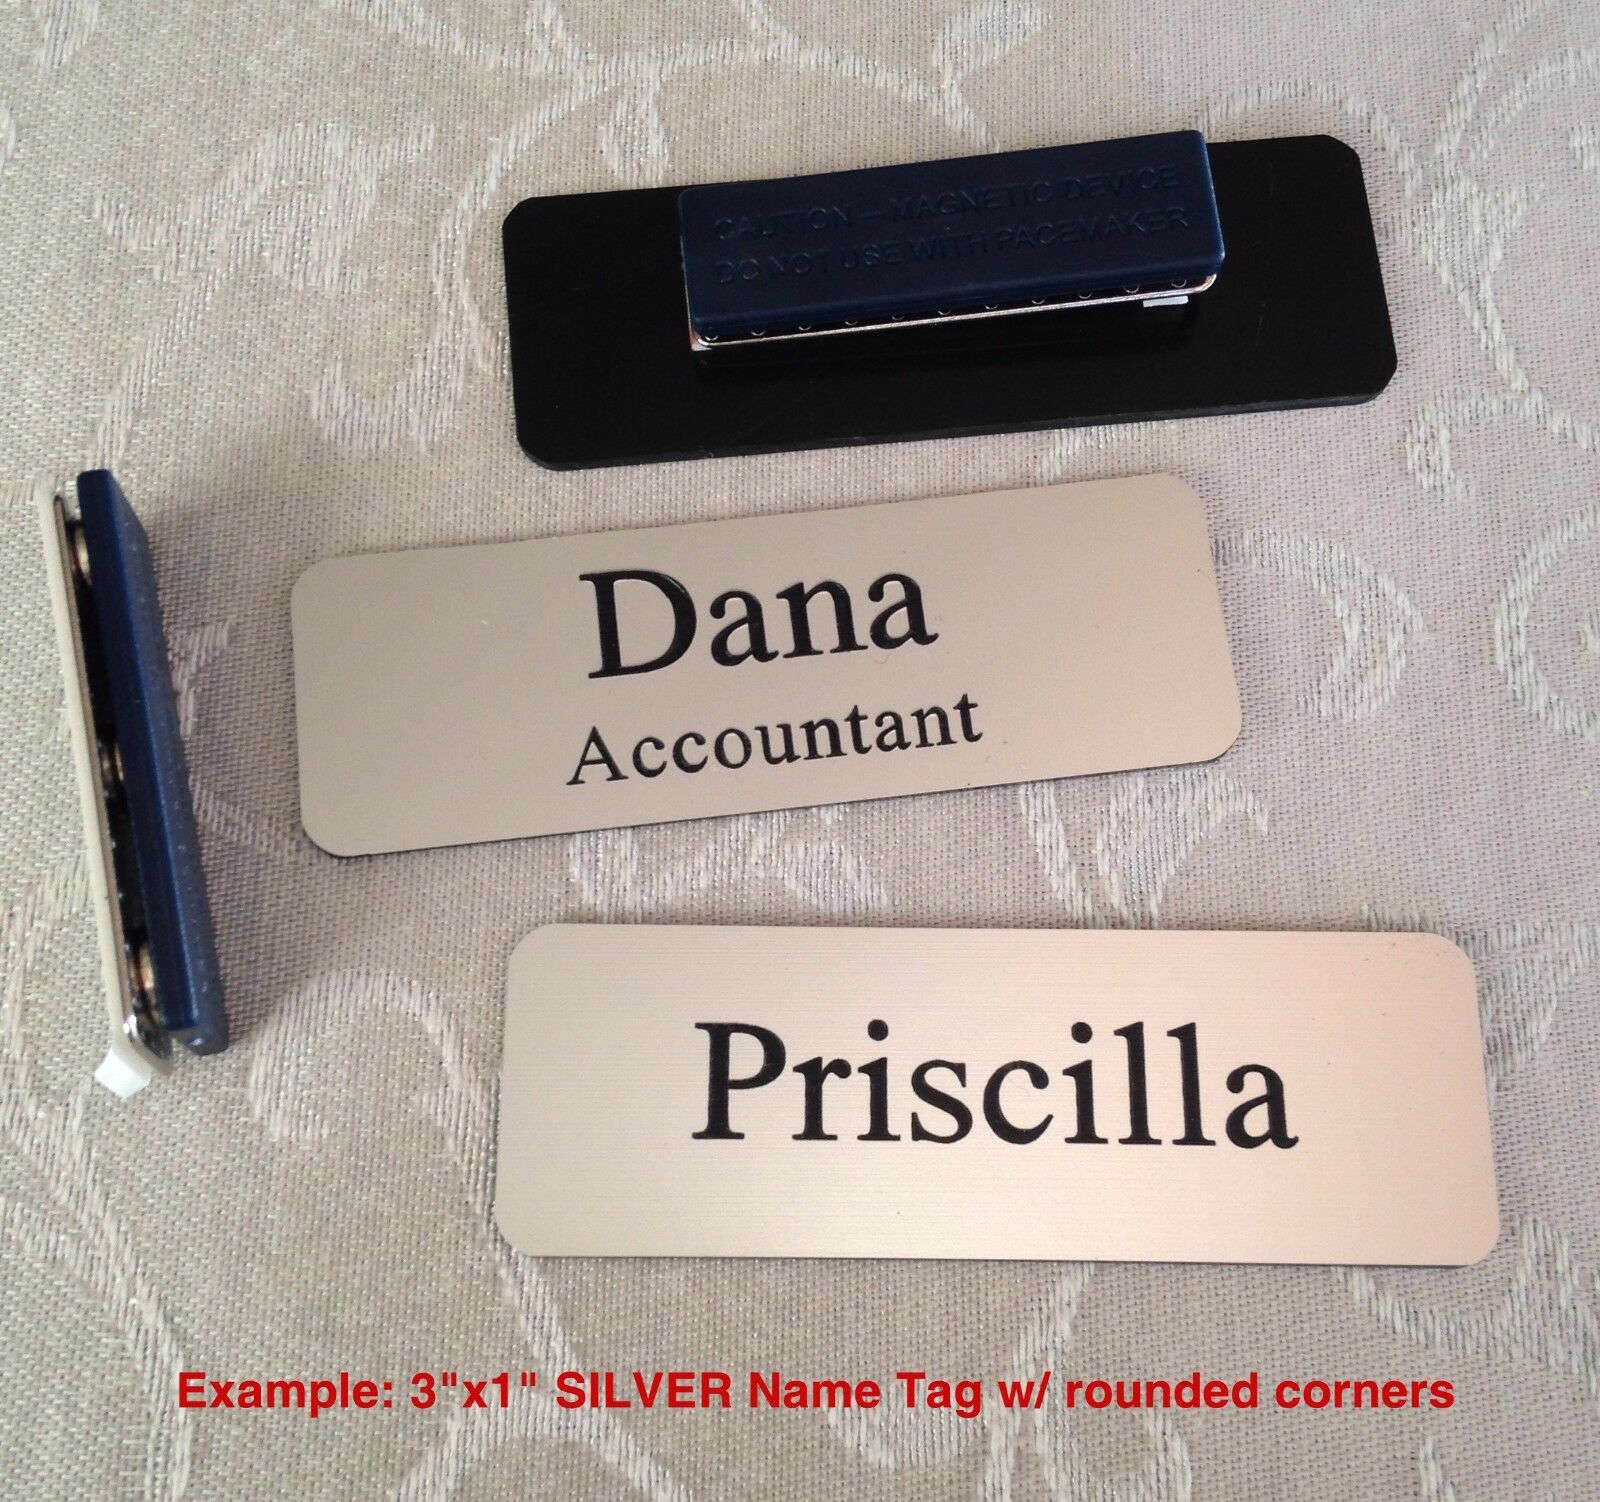 Custom Employee Name Tag Smth Silver W Corner Rounds & Magnet Attachment 1" X 3"